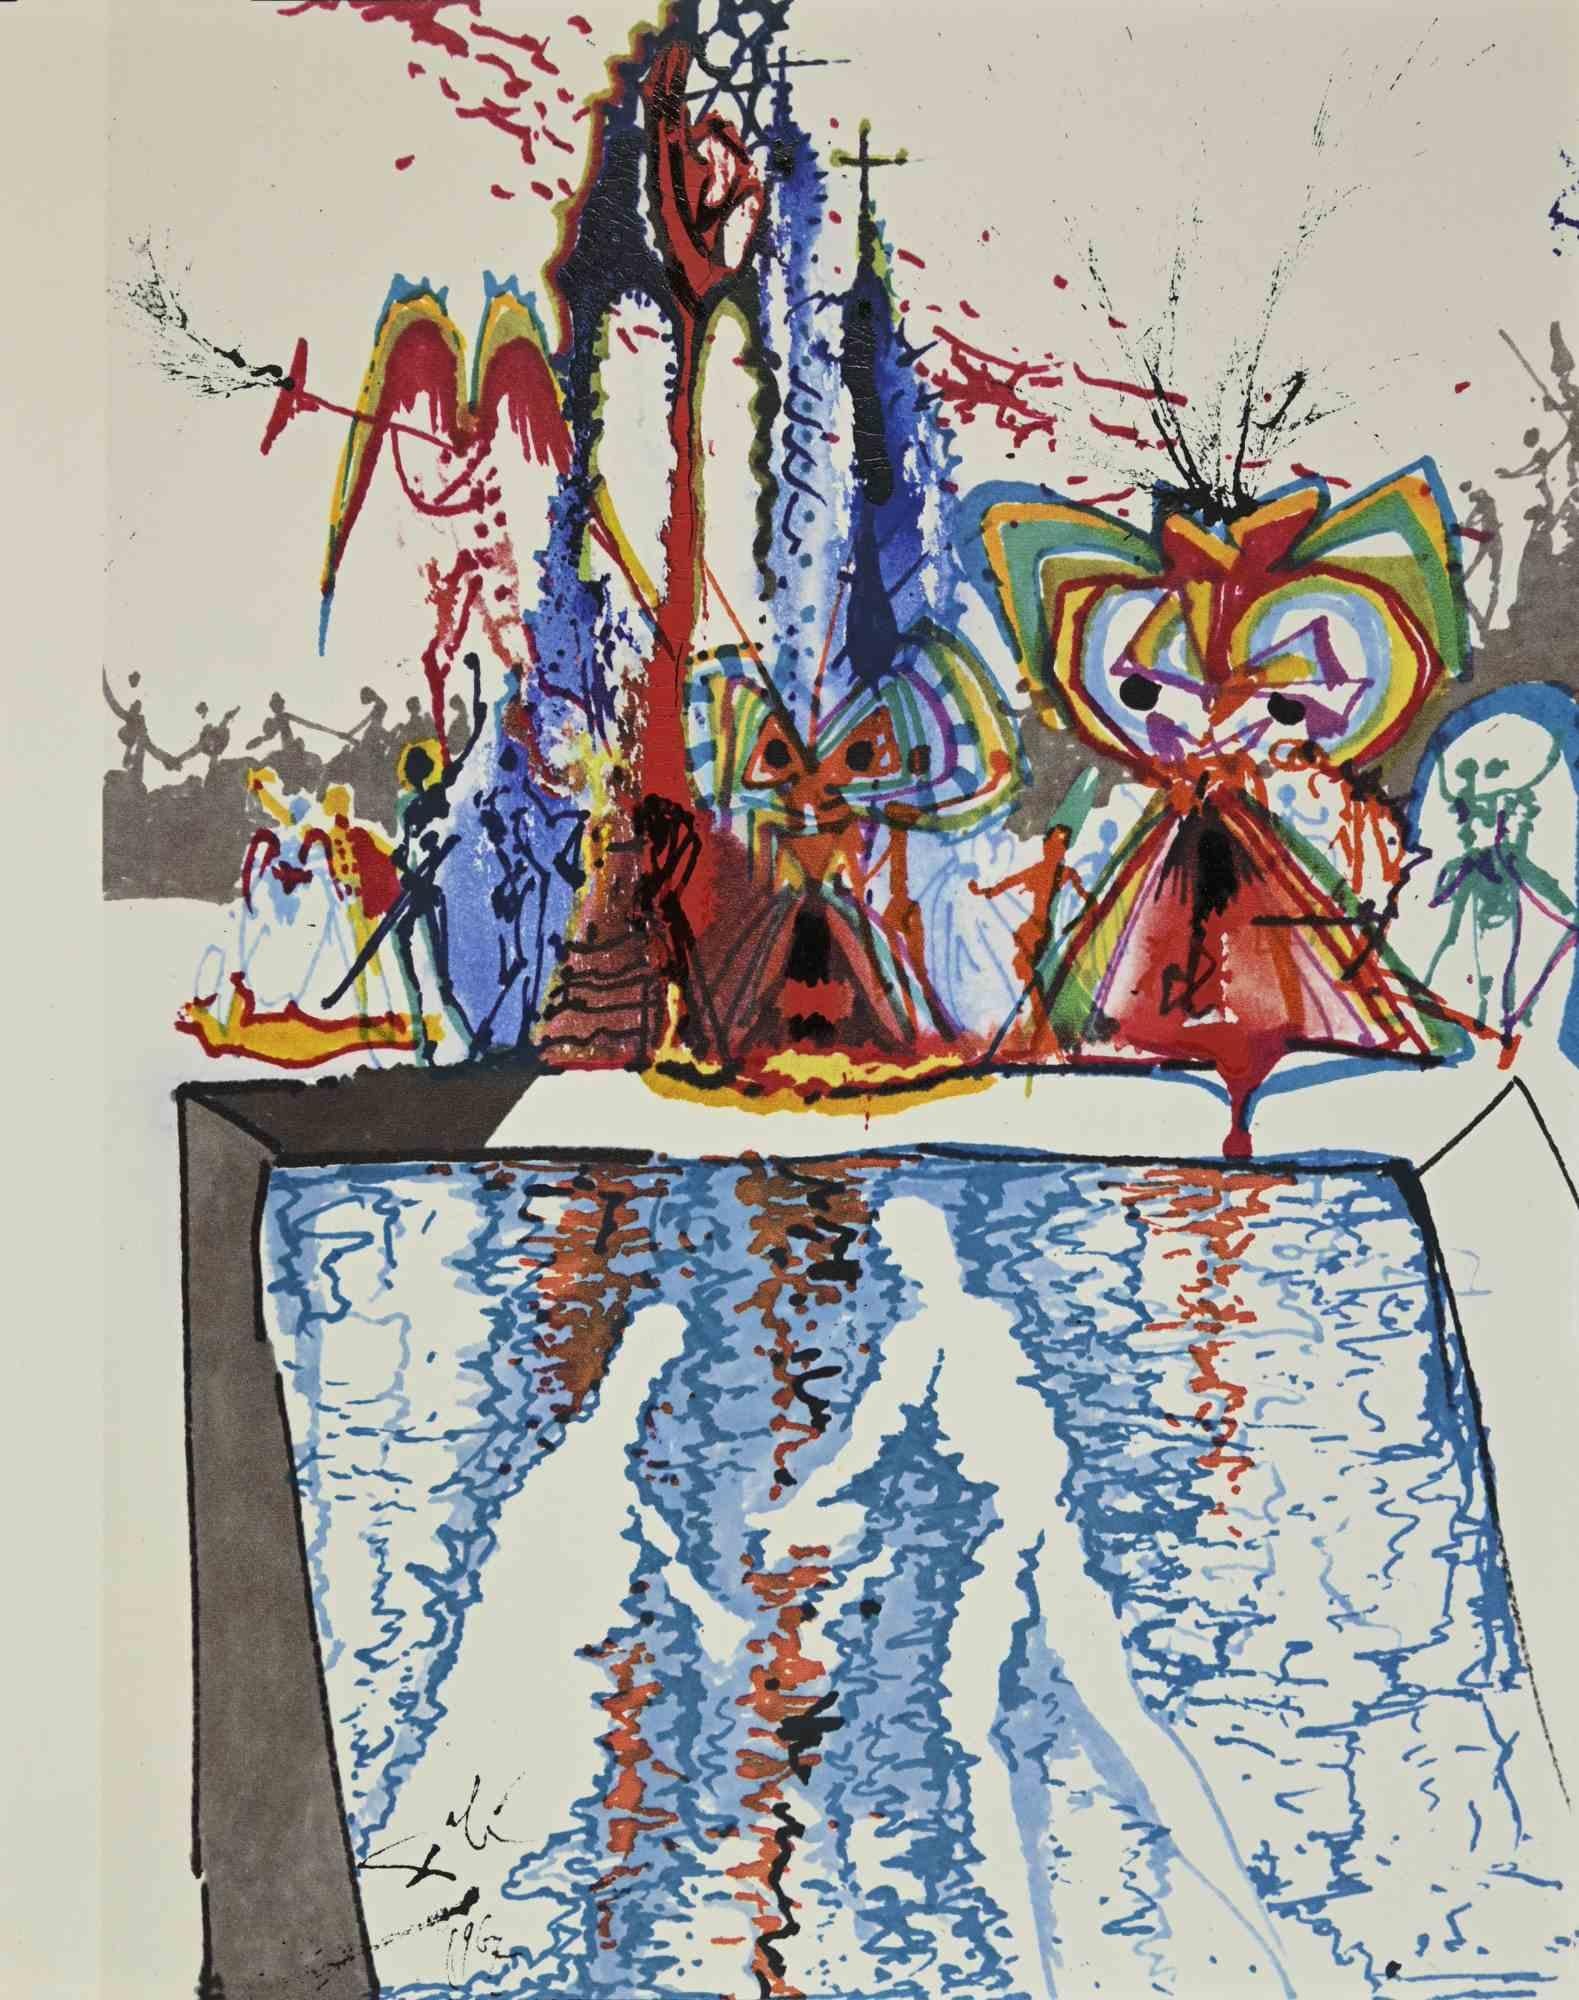 Salvador Dalí Print - Act IV, Scene III - From “Romeo and Juliet” - Lithograph-1975